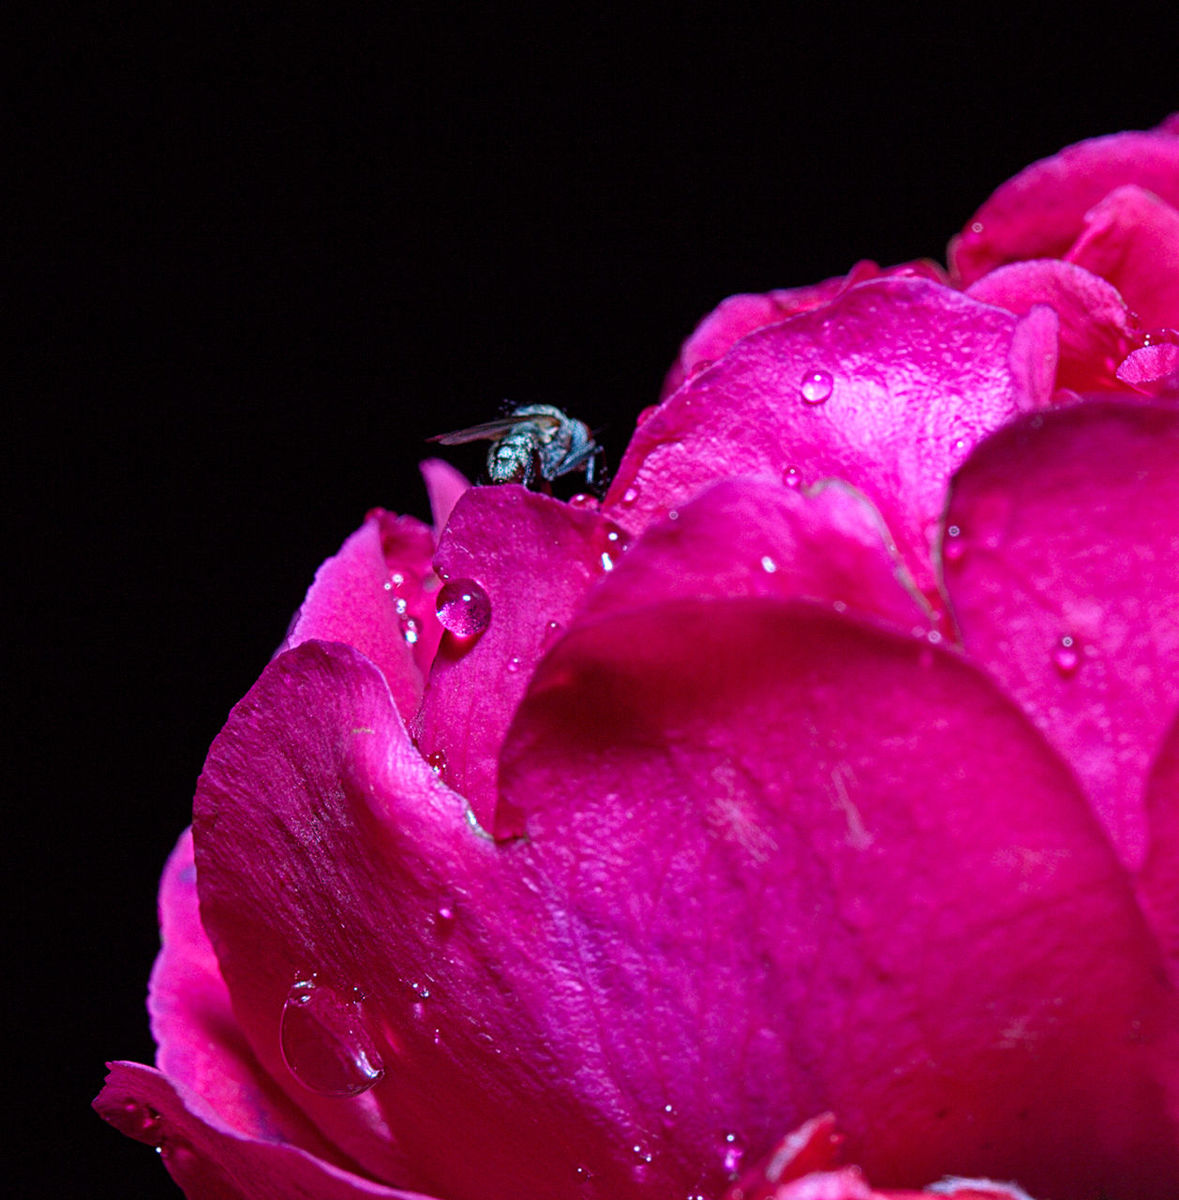 flower, petal, drop, freshness, water, fragility, flower head, wet, beauty in nature, close-up, pink color, nature, rose - flower, blooming, dew, black background, single flower, studio shot, growth, raindrop